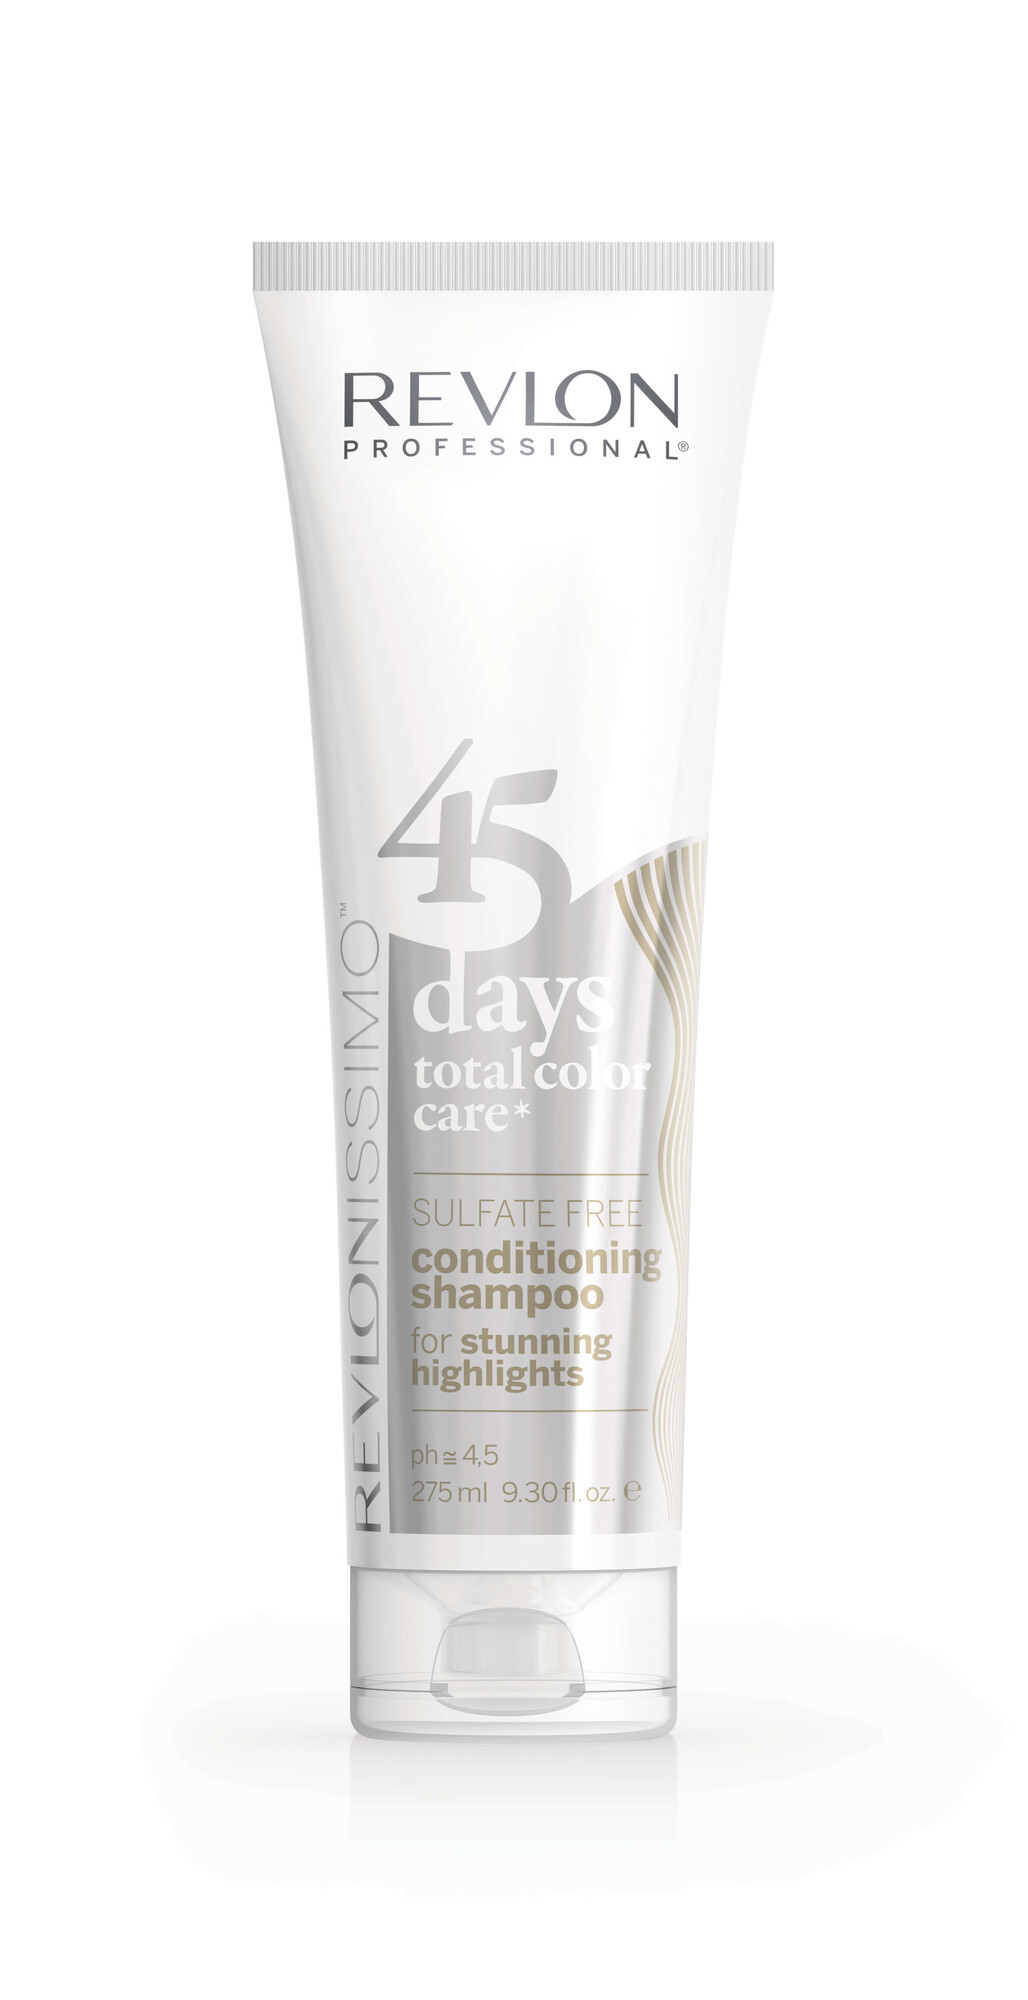 Revlon 45 Days Total Color Care Conditioning Shampoo